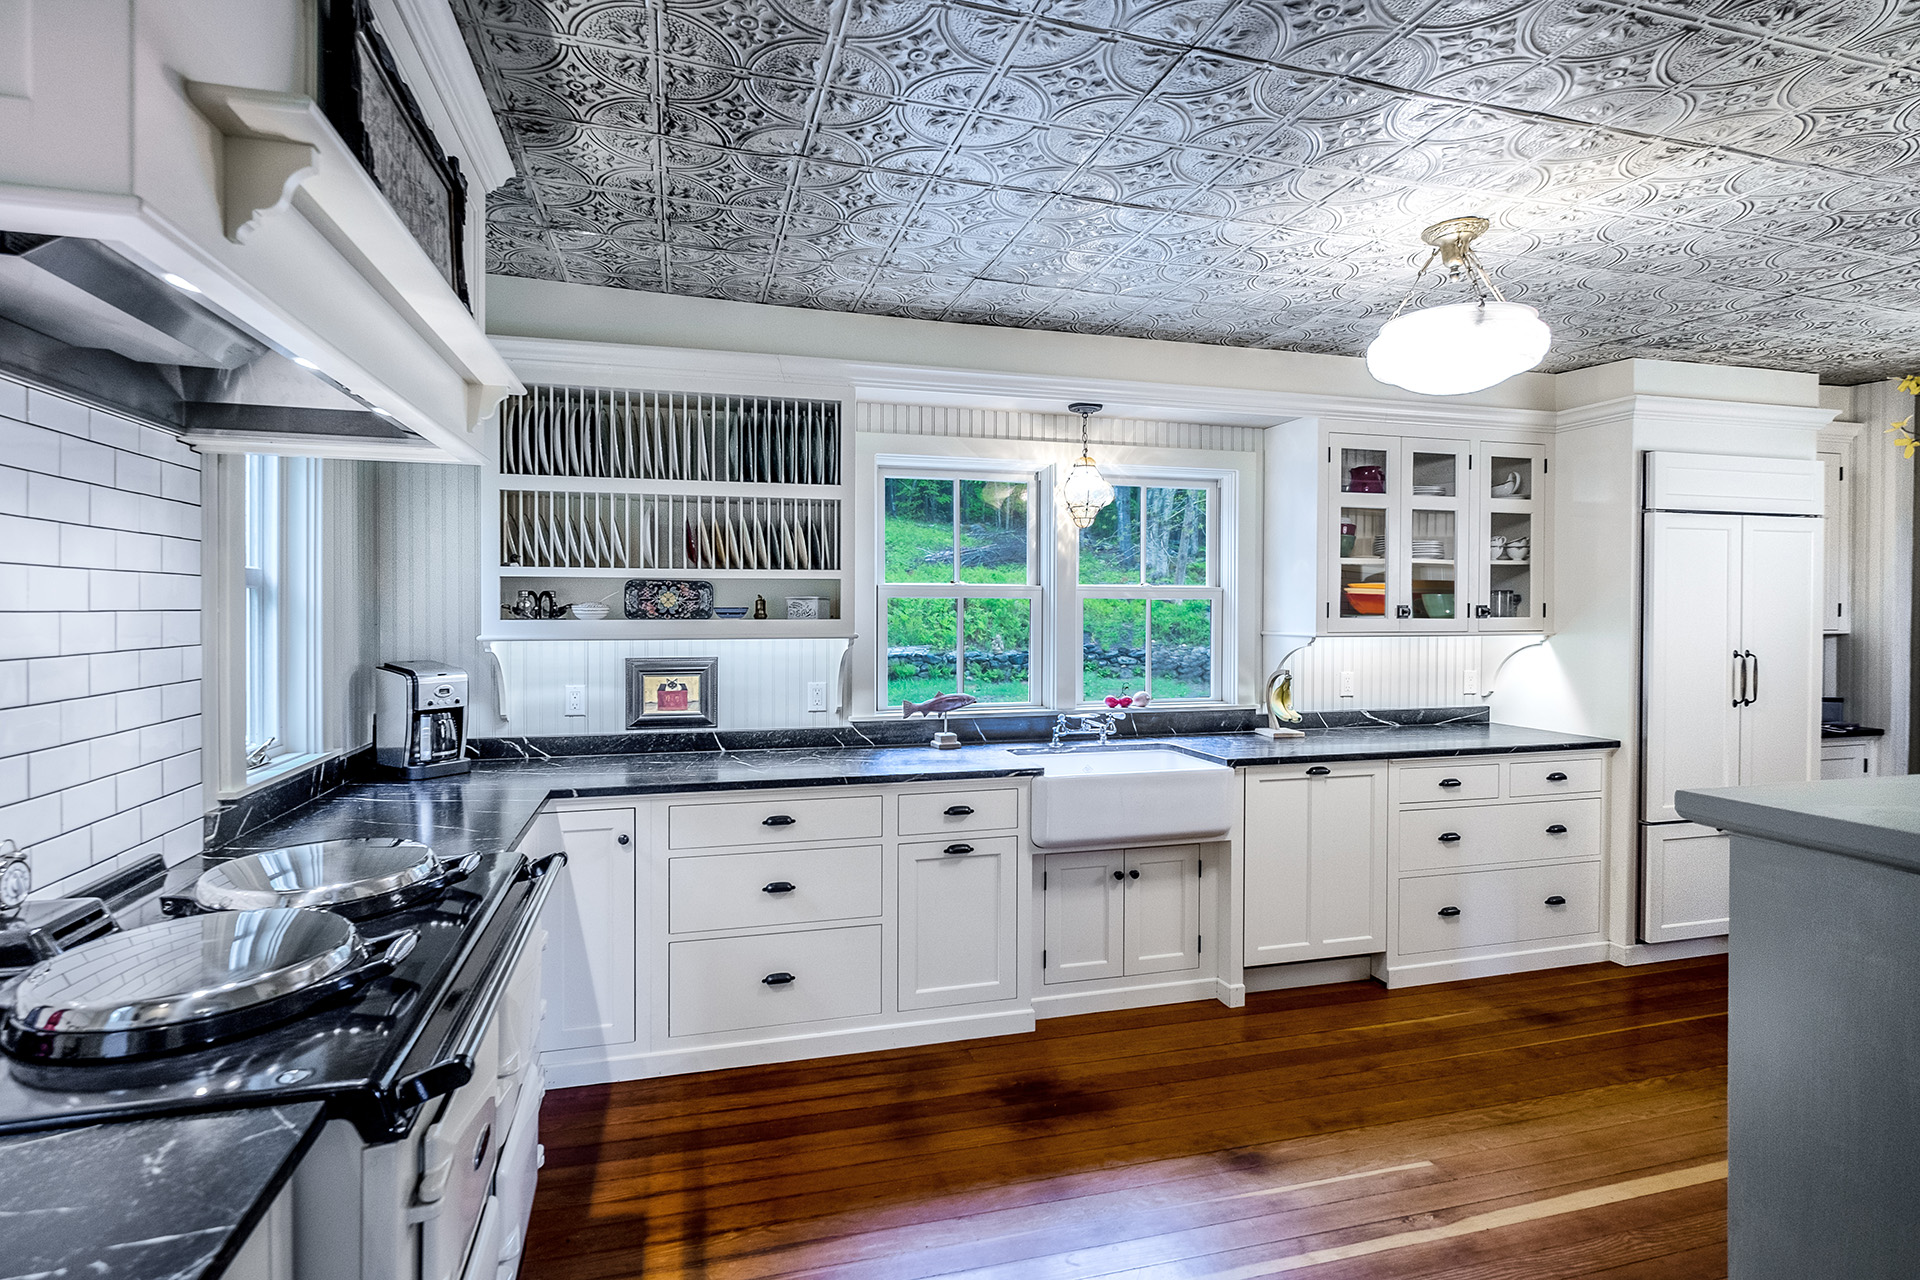 gorgeous kitchen made and designed by Kennebec company